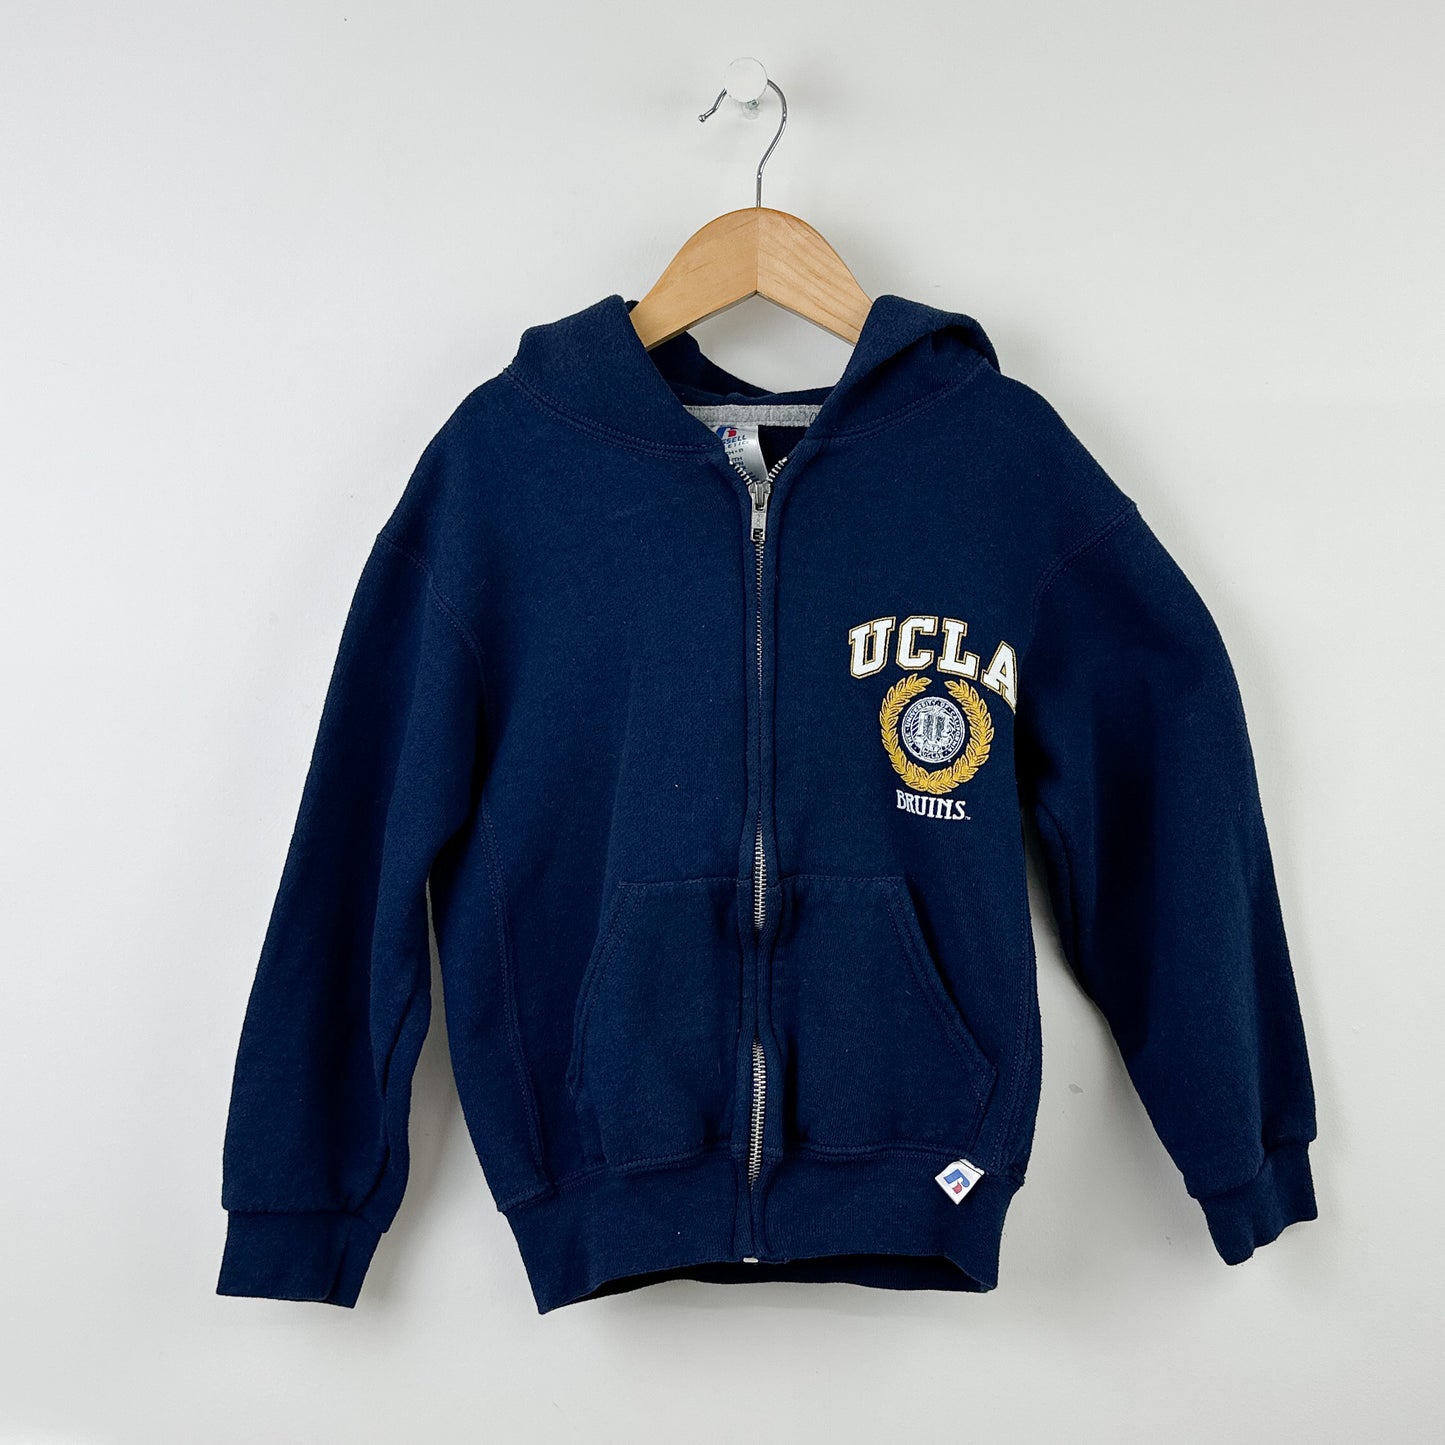 Vintage UCLA Zip Up Hoodie - Size Youth S (6-8)